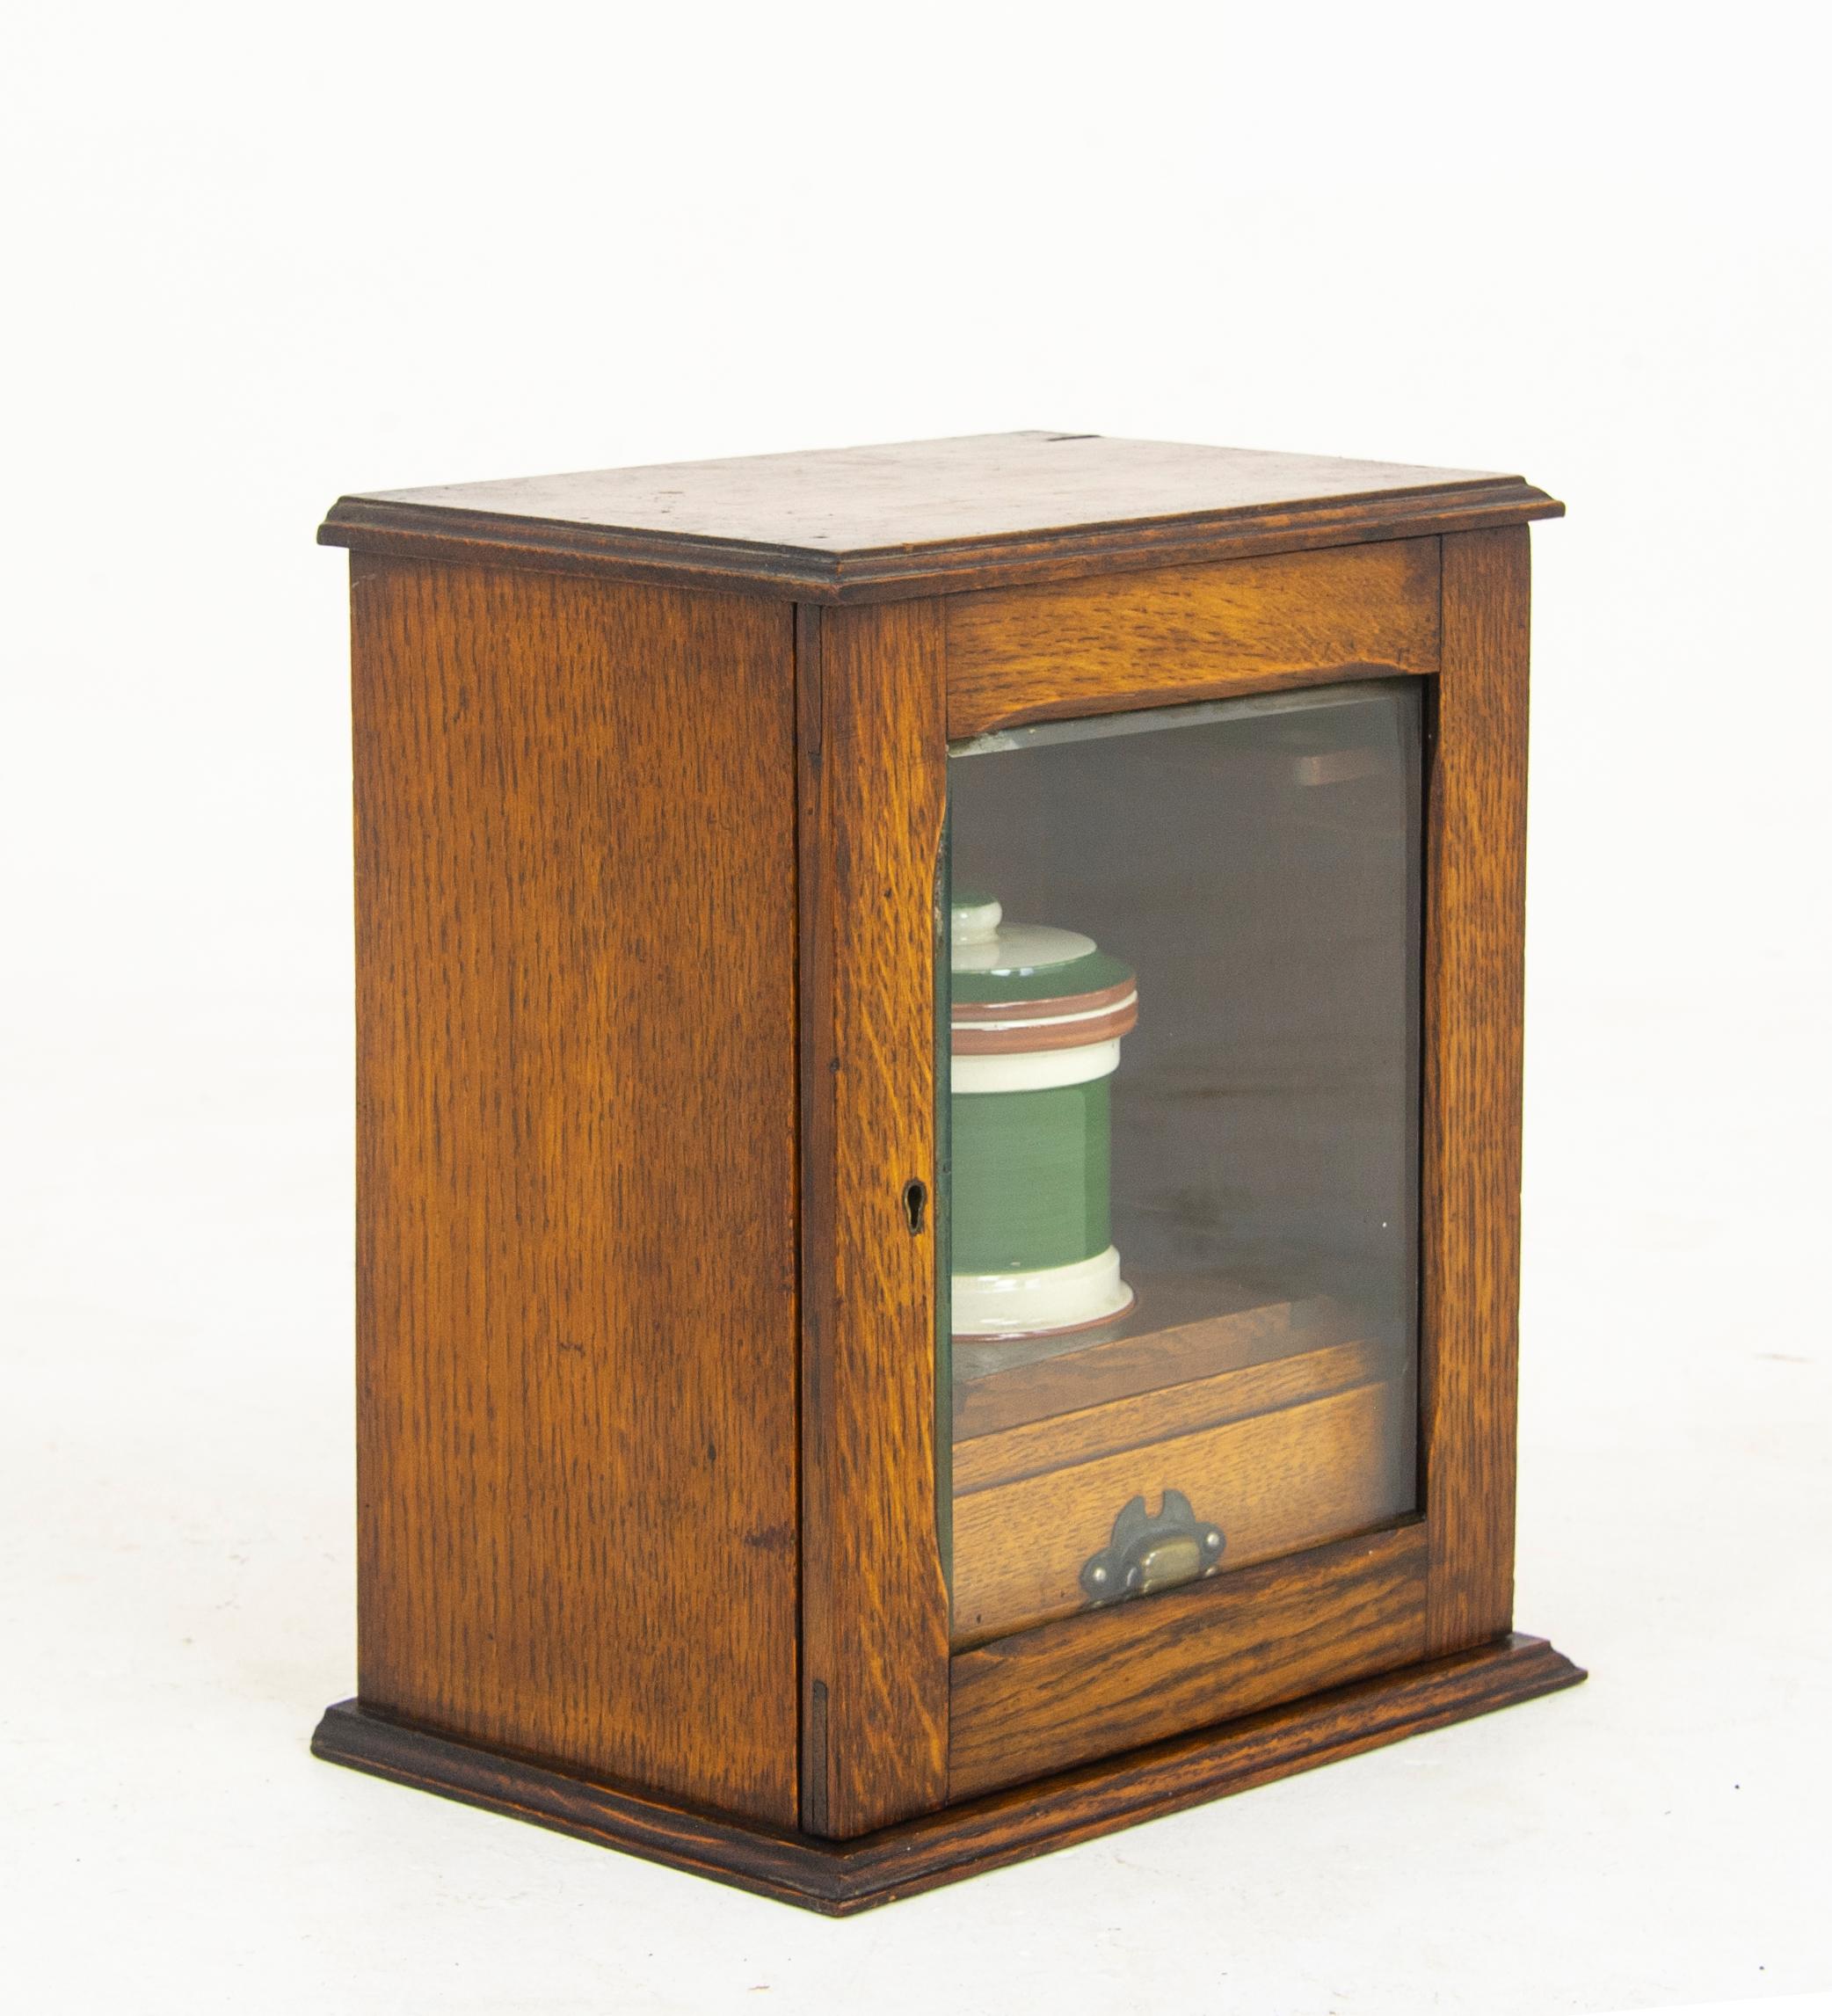 Antique smokers cabinet, antique humidor, Victorian, Scotland, 1900, antique furniture, B1290

Scotland 1900
Solid oak with original finish
Single bevelled glass door
Fitted with single drawer interior and china humidor
Flanked by pipe